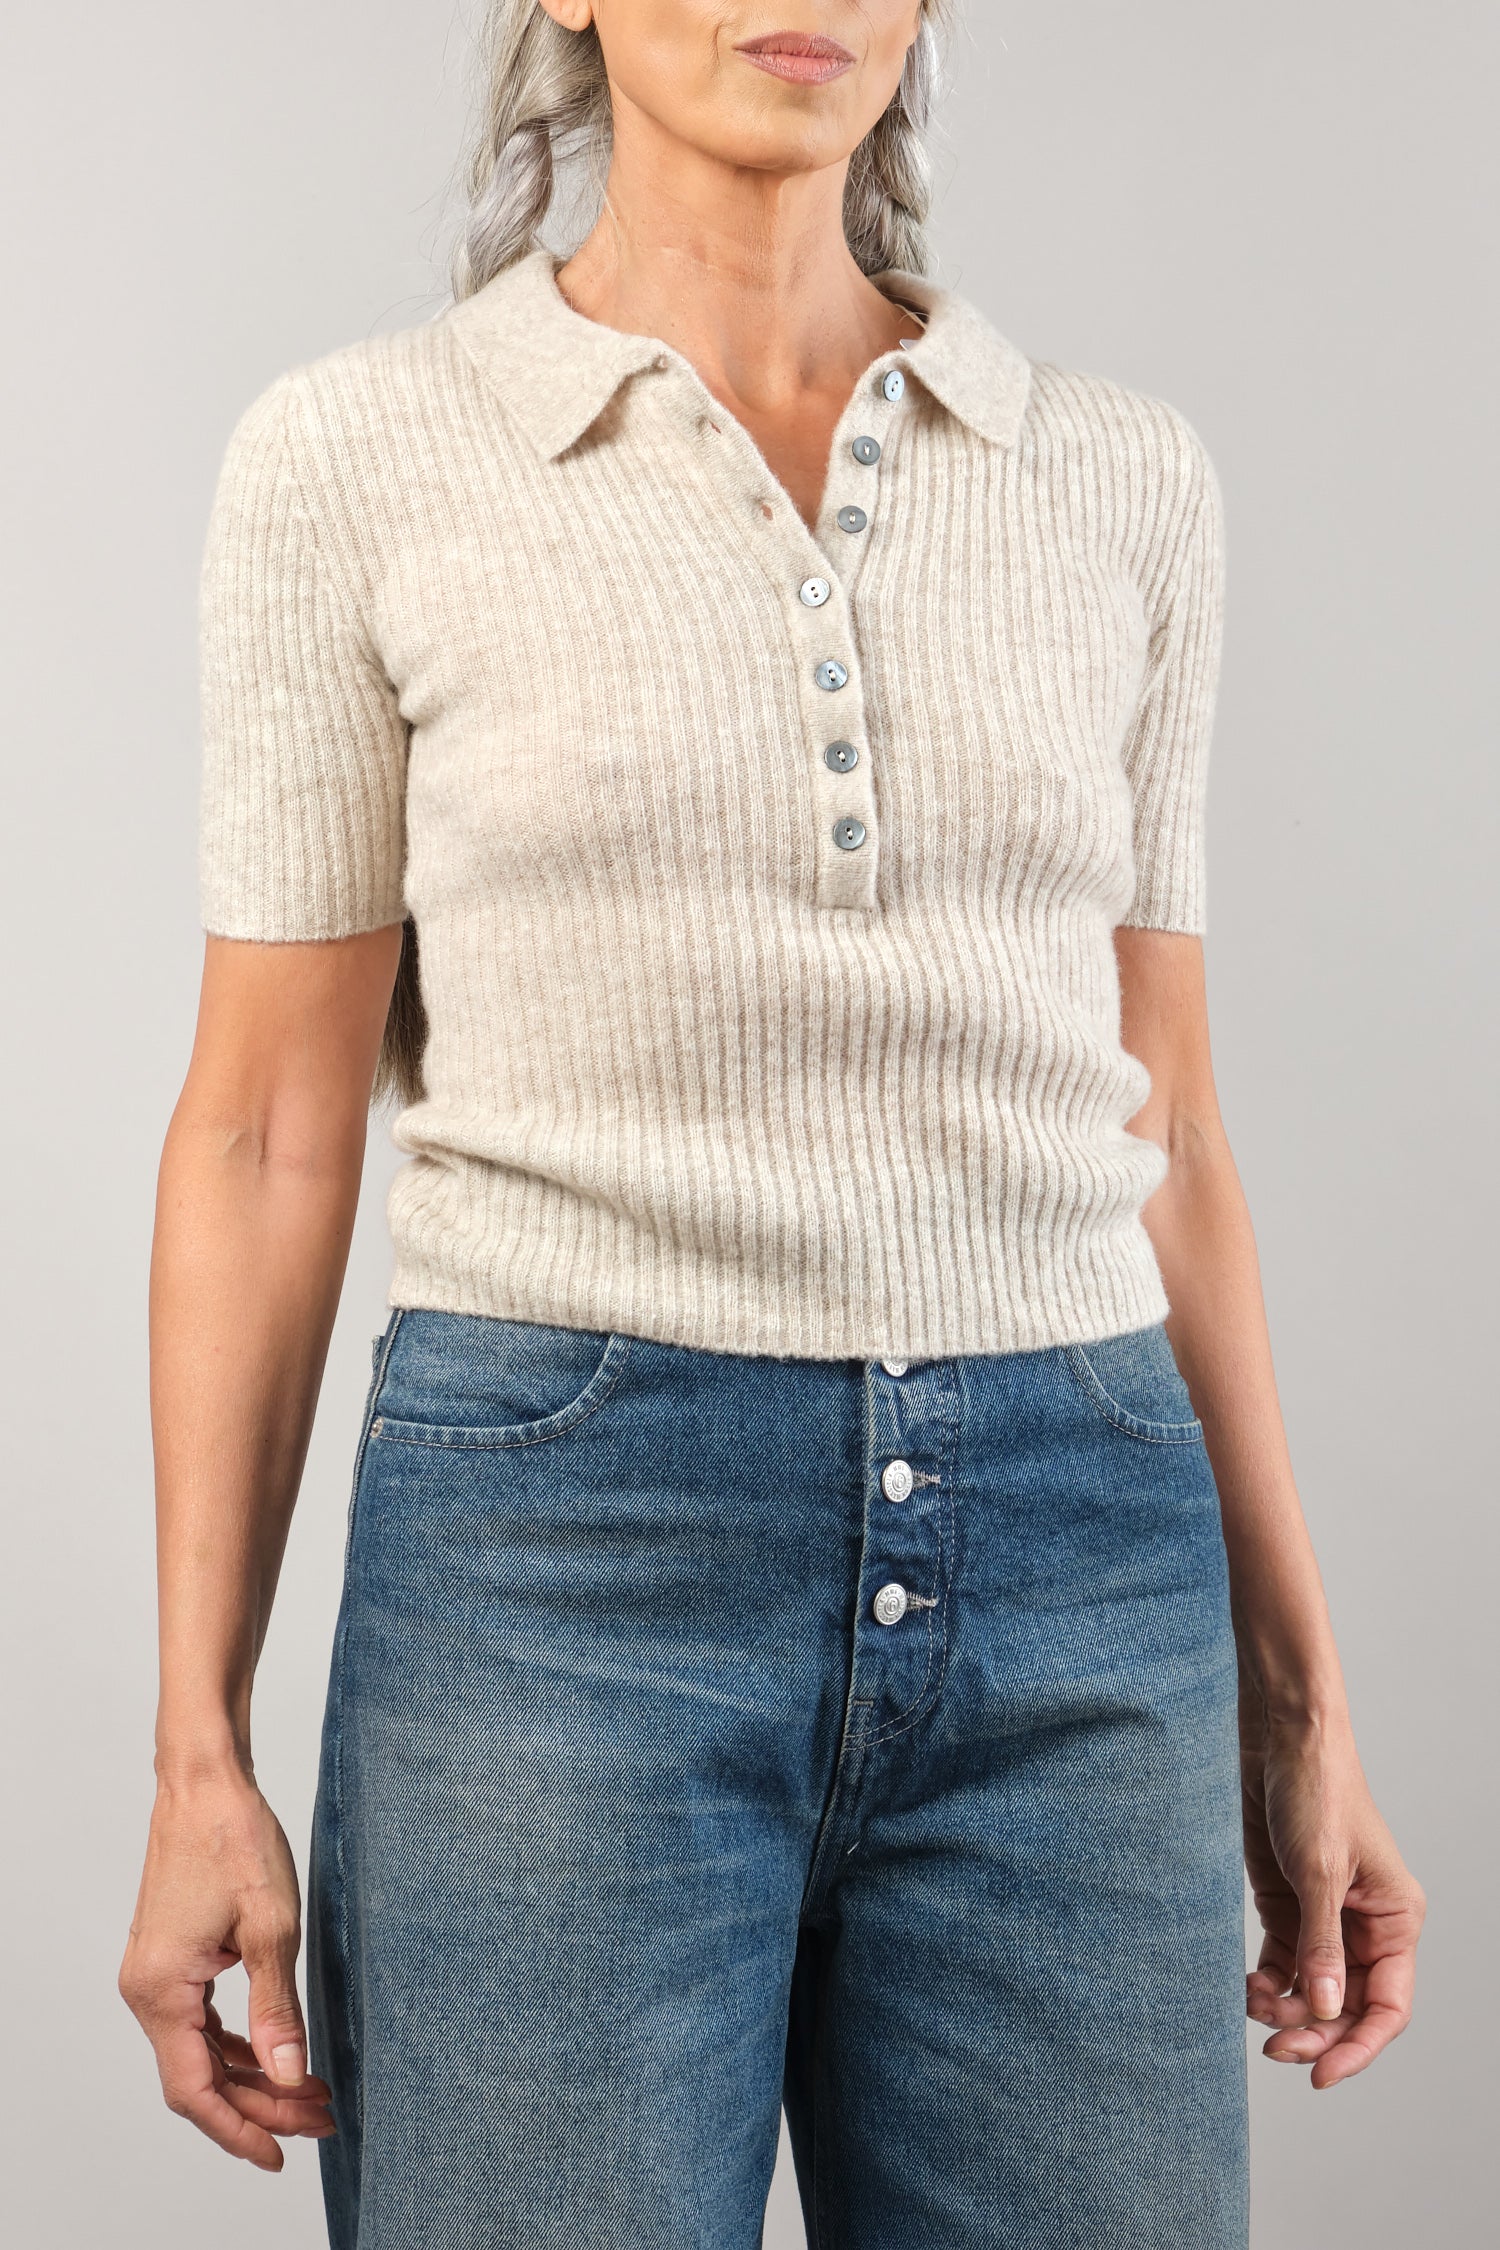 Front of Molly Collared Short Sleeve in Heather Dove